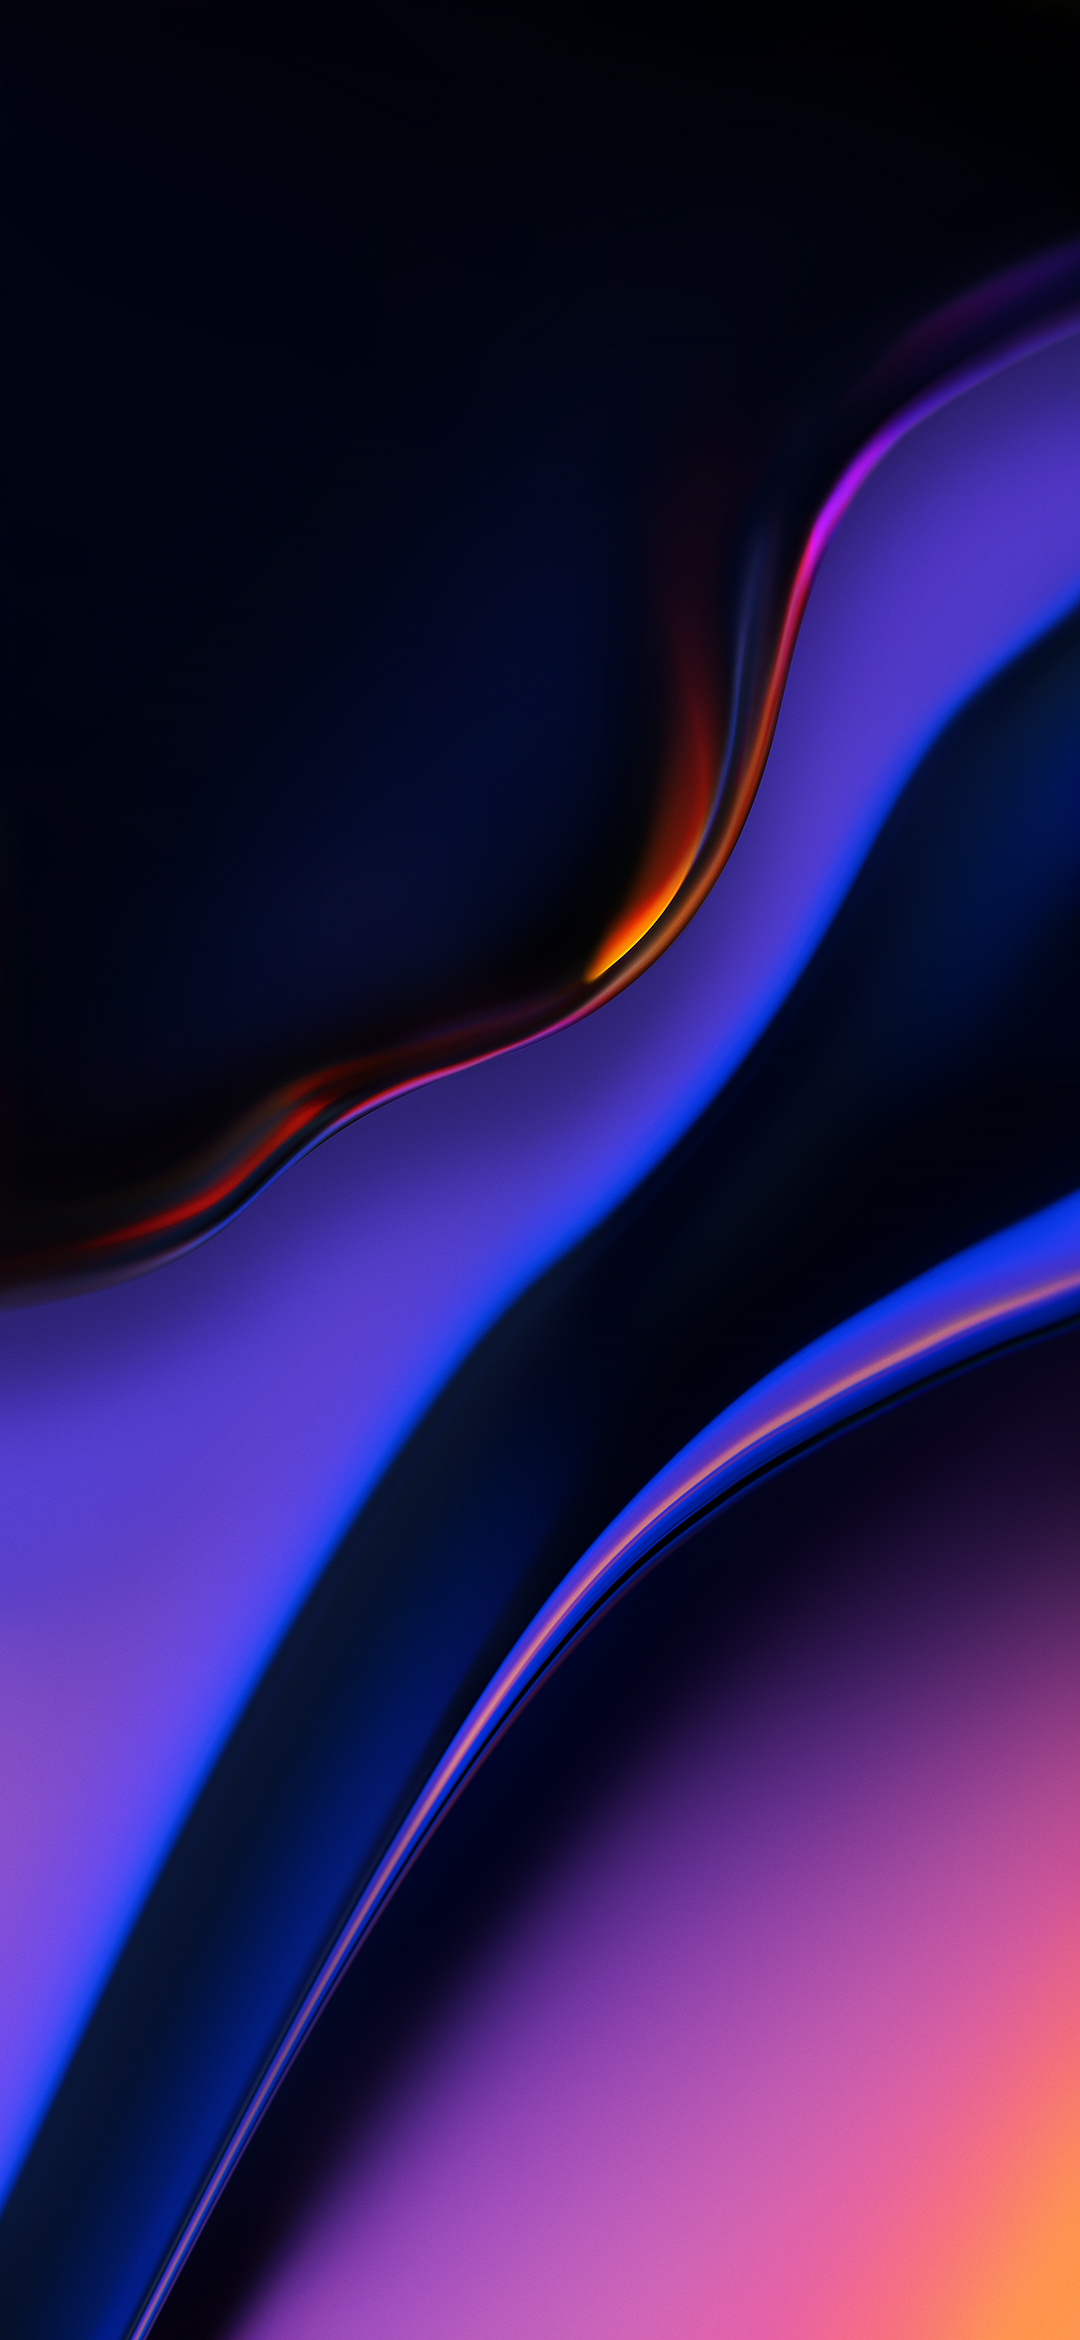 Samsung Galaxy Xcover 5 Wallpapers